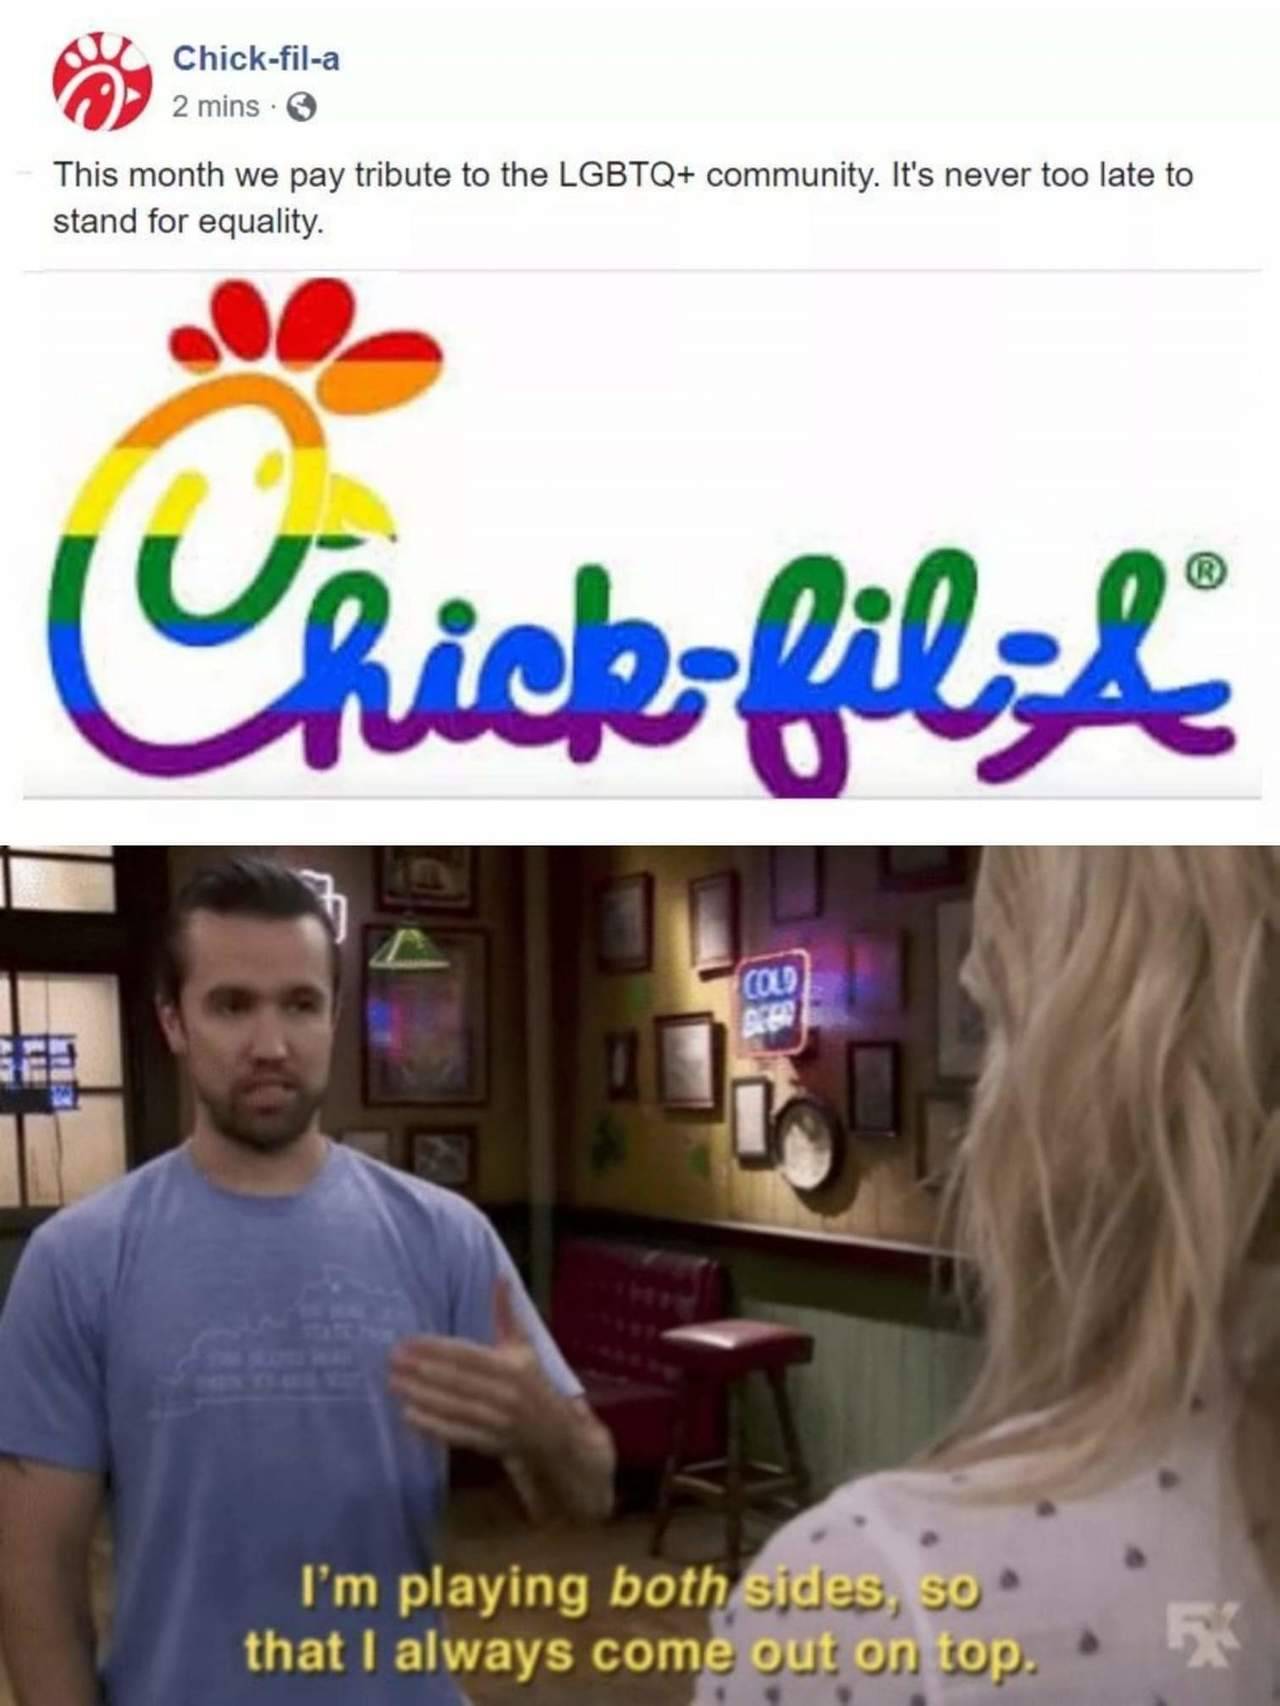 feminismandmedia: Chick-fil-A in June: how do you do fellow gays? We love the gays.